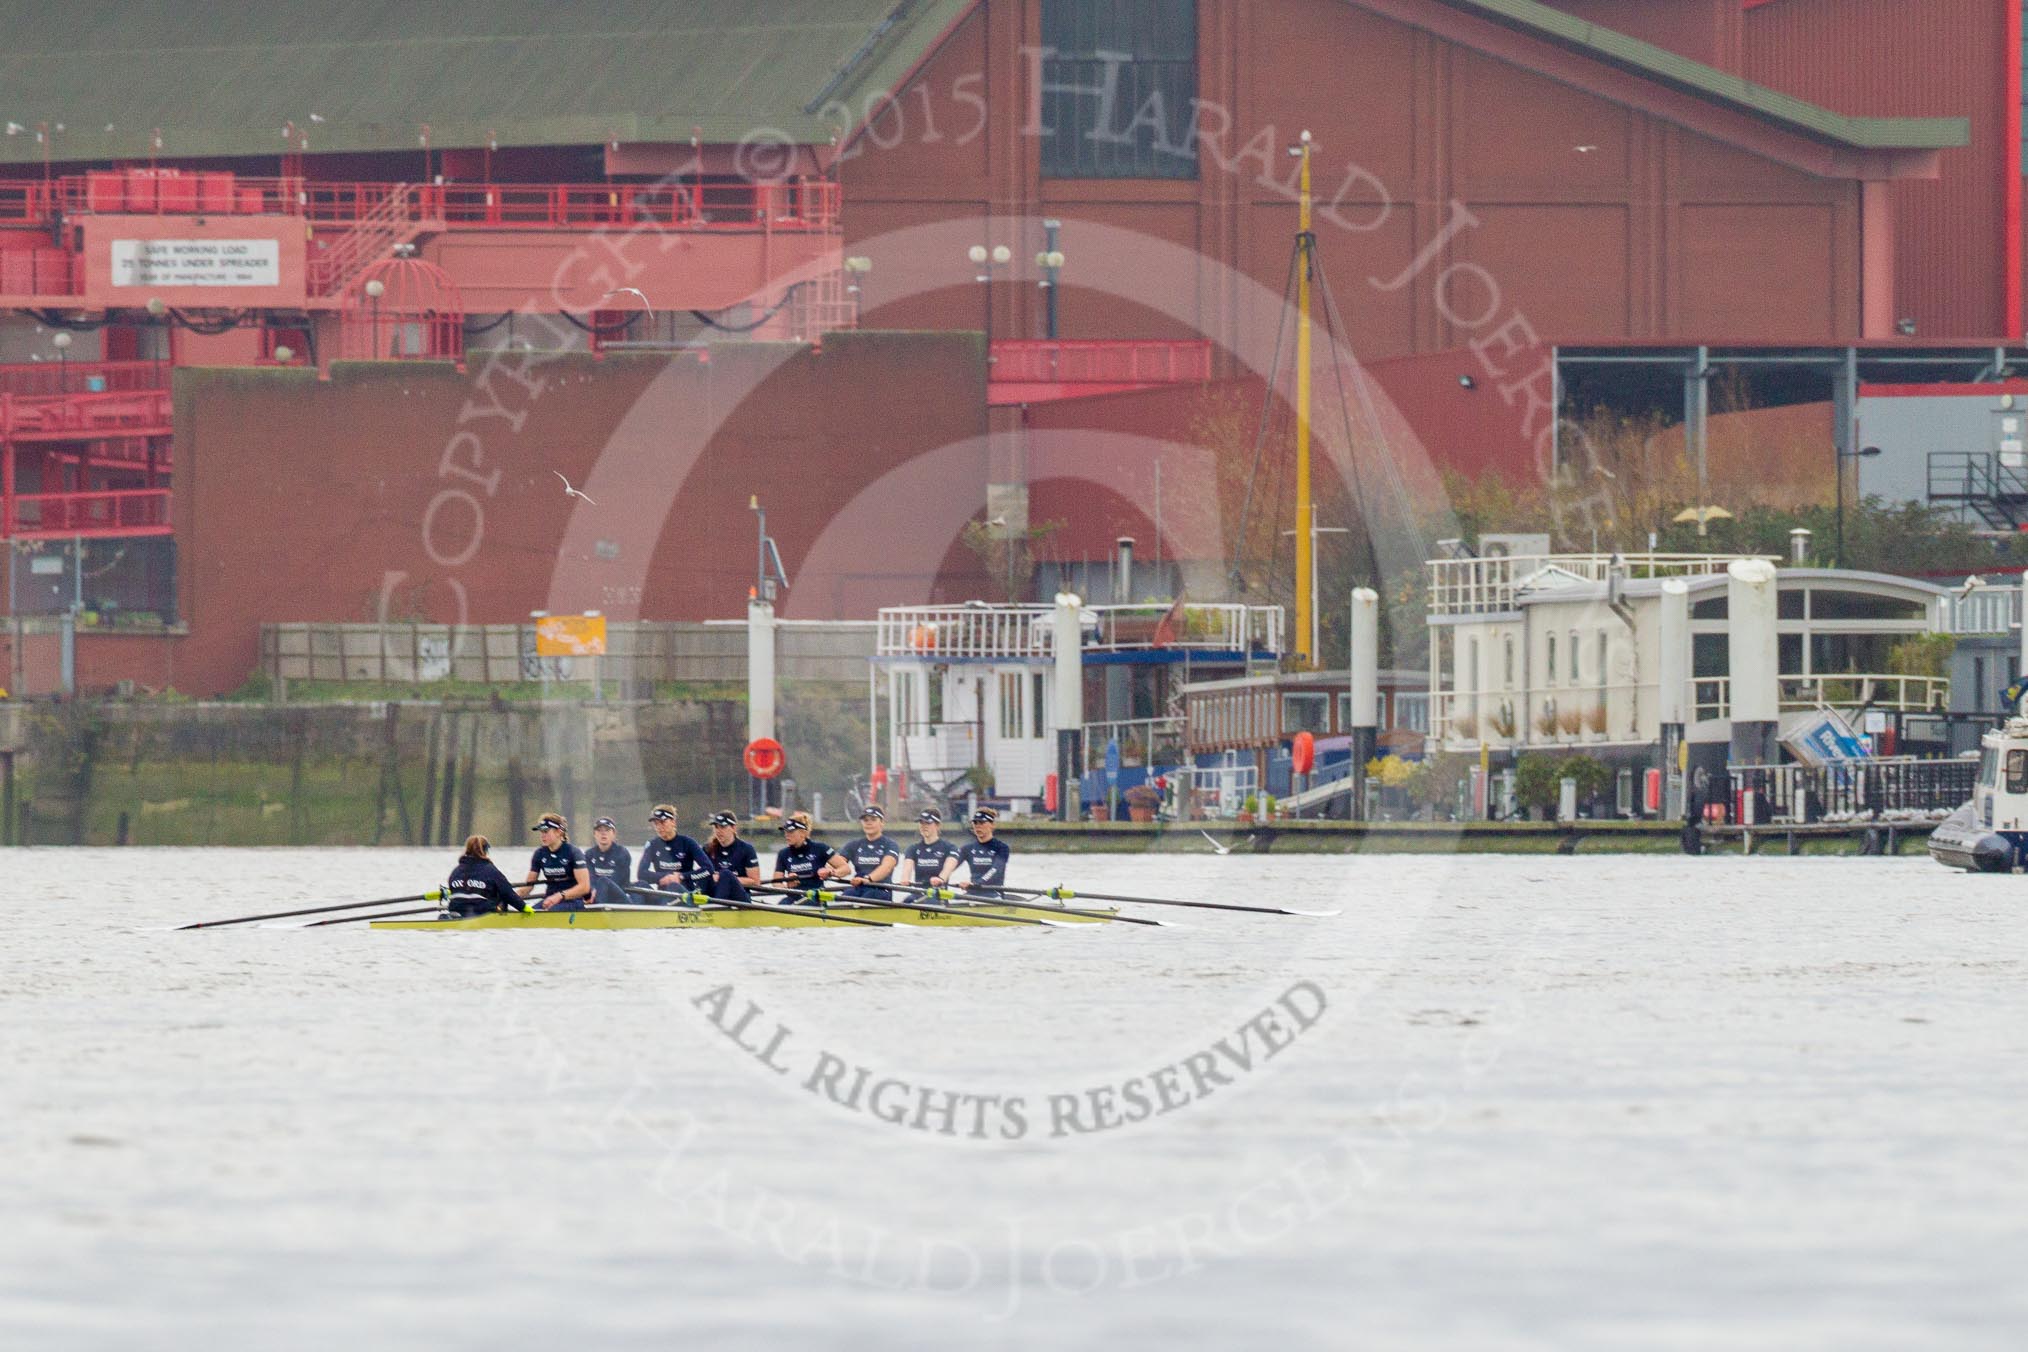 The Boat Race season 2016 - Women's Boat Race Trial Eights (OUWBC, Oxford): "Charybdis" waiting for the start of the race.
River Thames between Putney Bridge and Mortlake,
London SW15,

United Kingdom,
on 10 December 2015 at 12:08, image #121